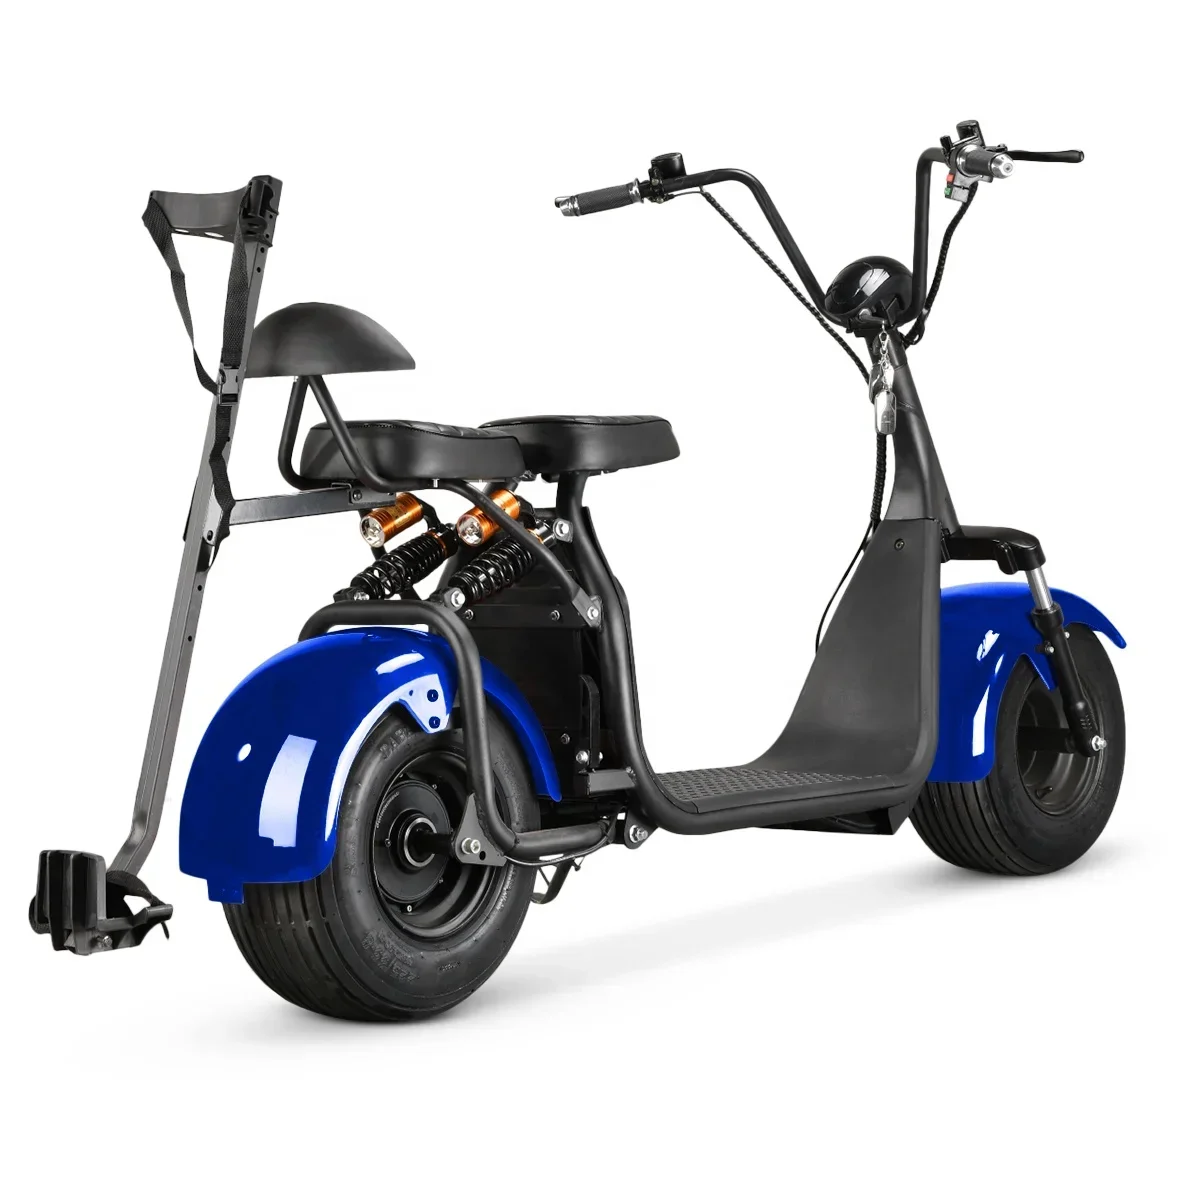 

SoverSky 2000w Electric Golf Scooter 2 seat Fat Tire Carts Motorcycle Ebike US warehouse rack